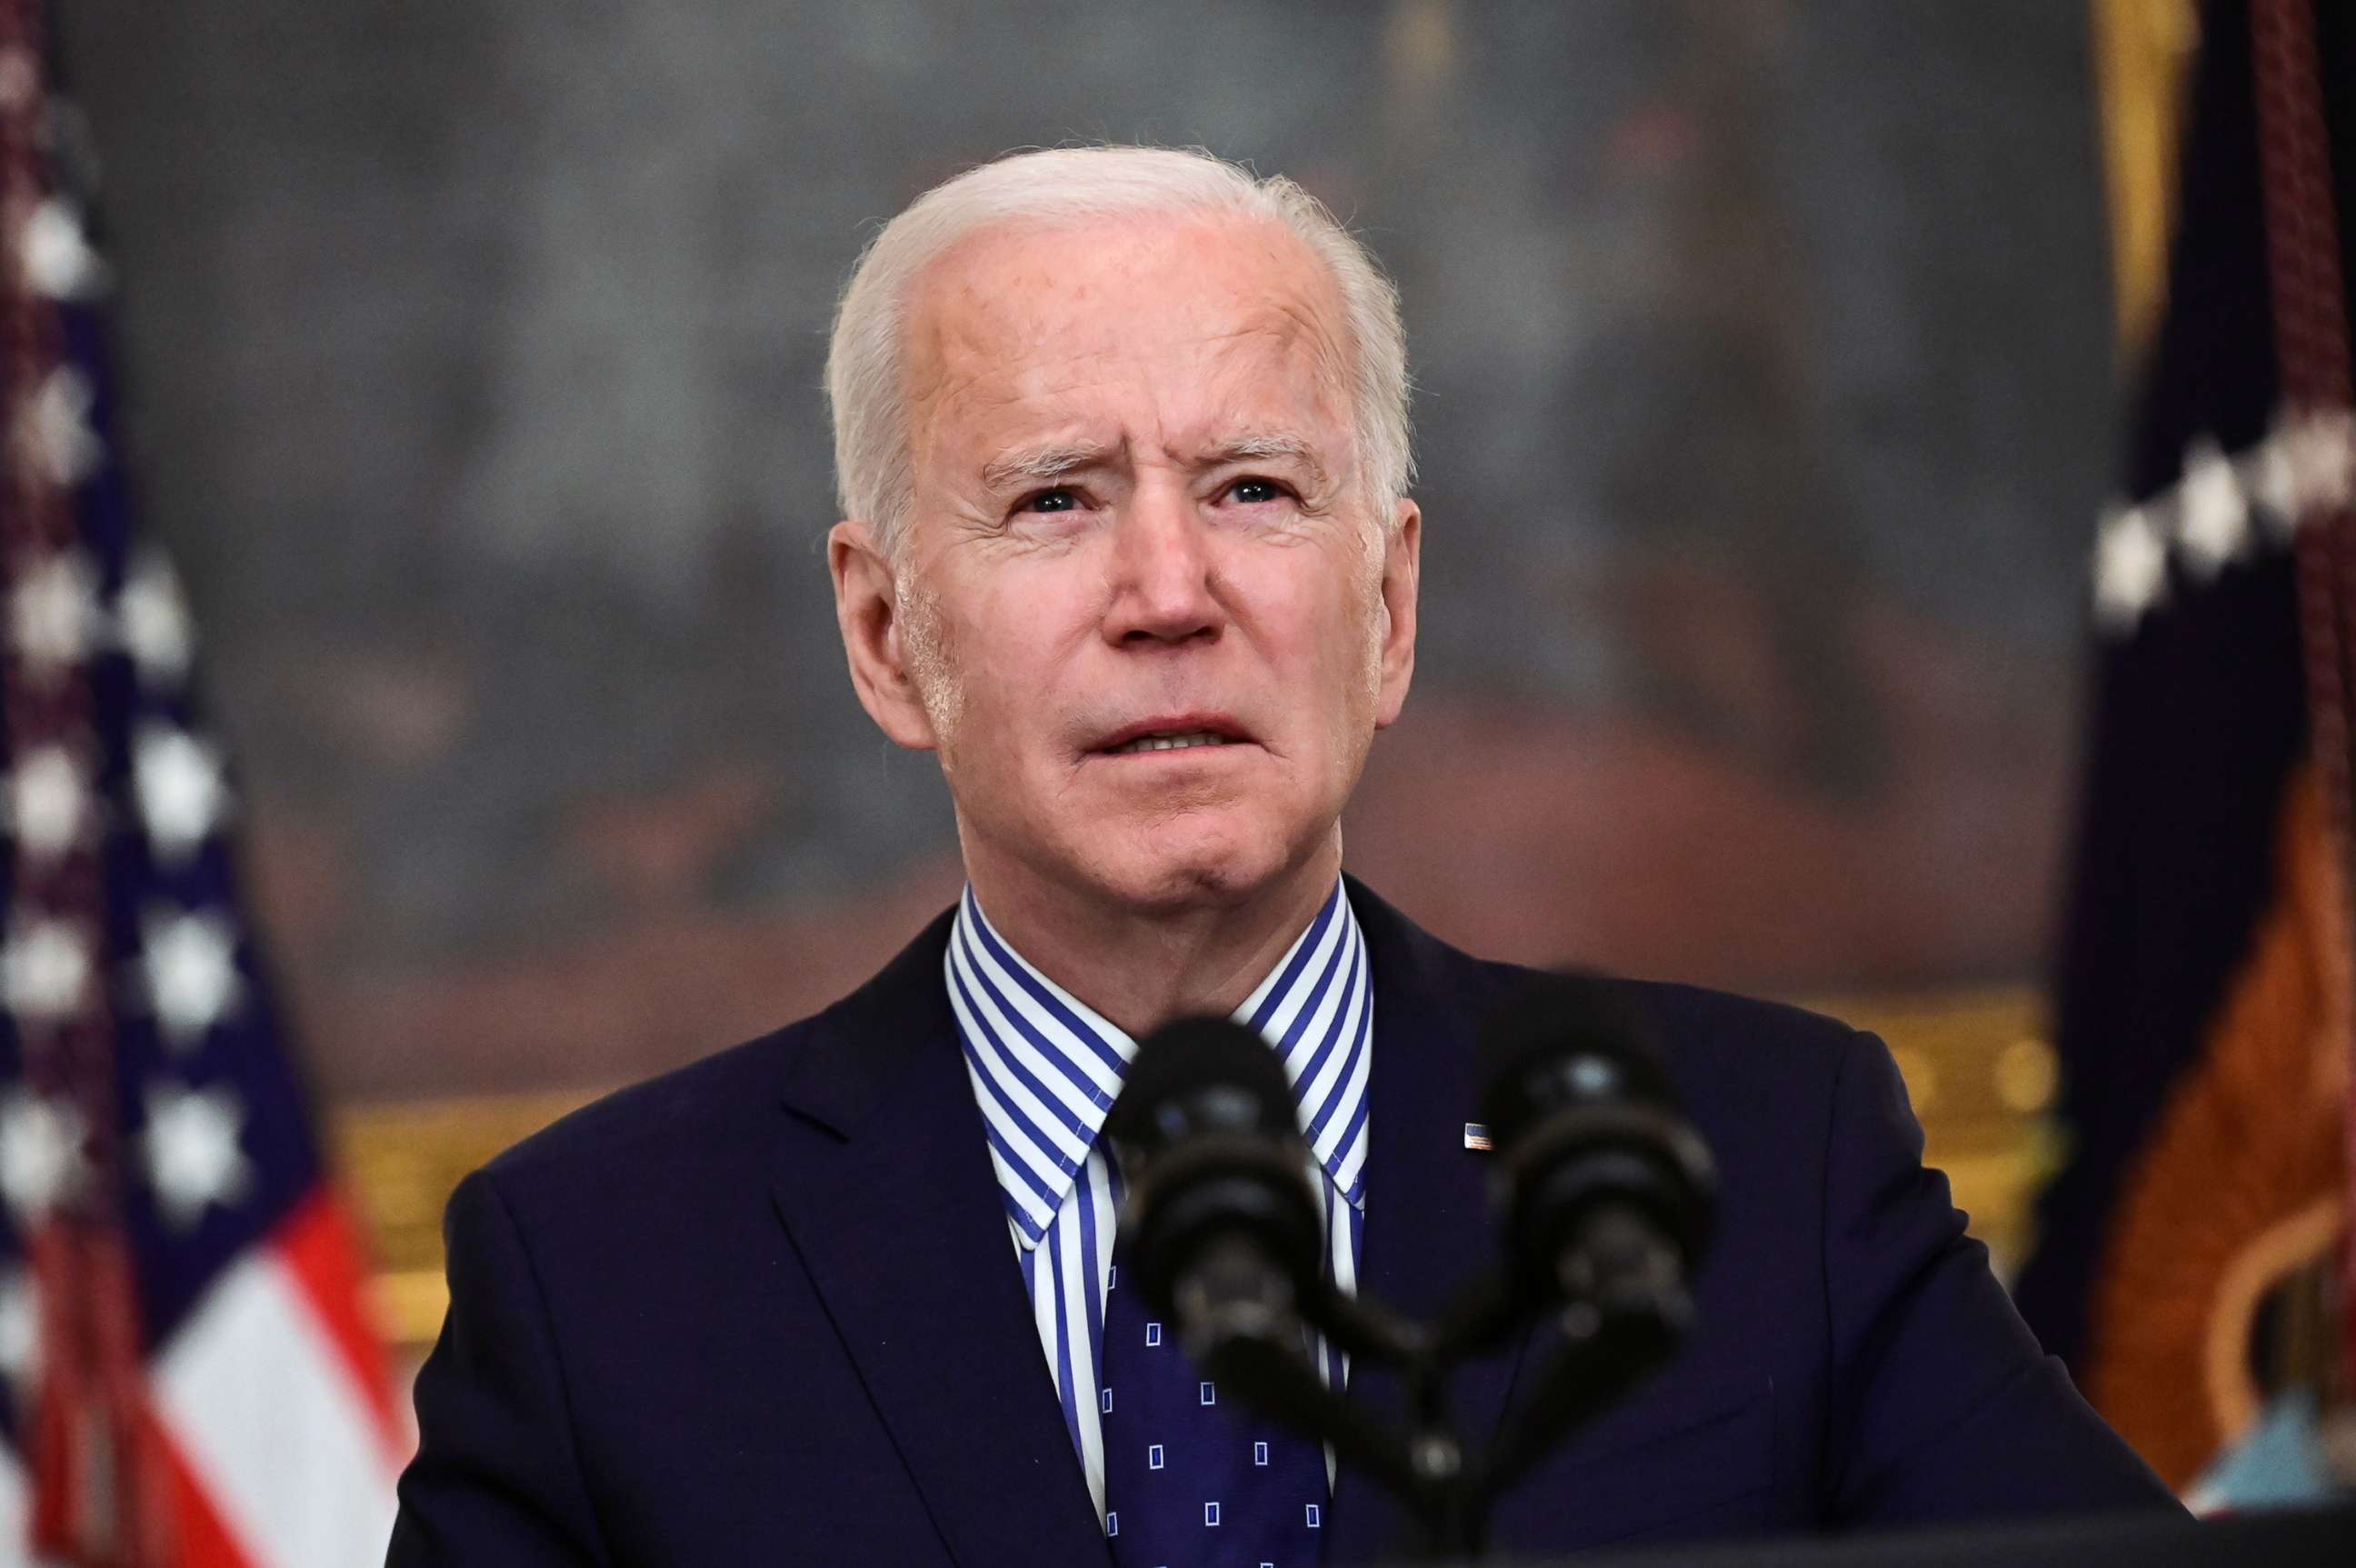 PHOTO: President Joe Biden makes remarks from the White House after his coronavirus pandemic relief legislation passed in the Senate, in Washington, March 6, 2021.